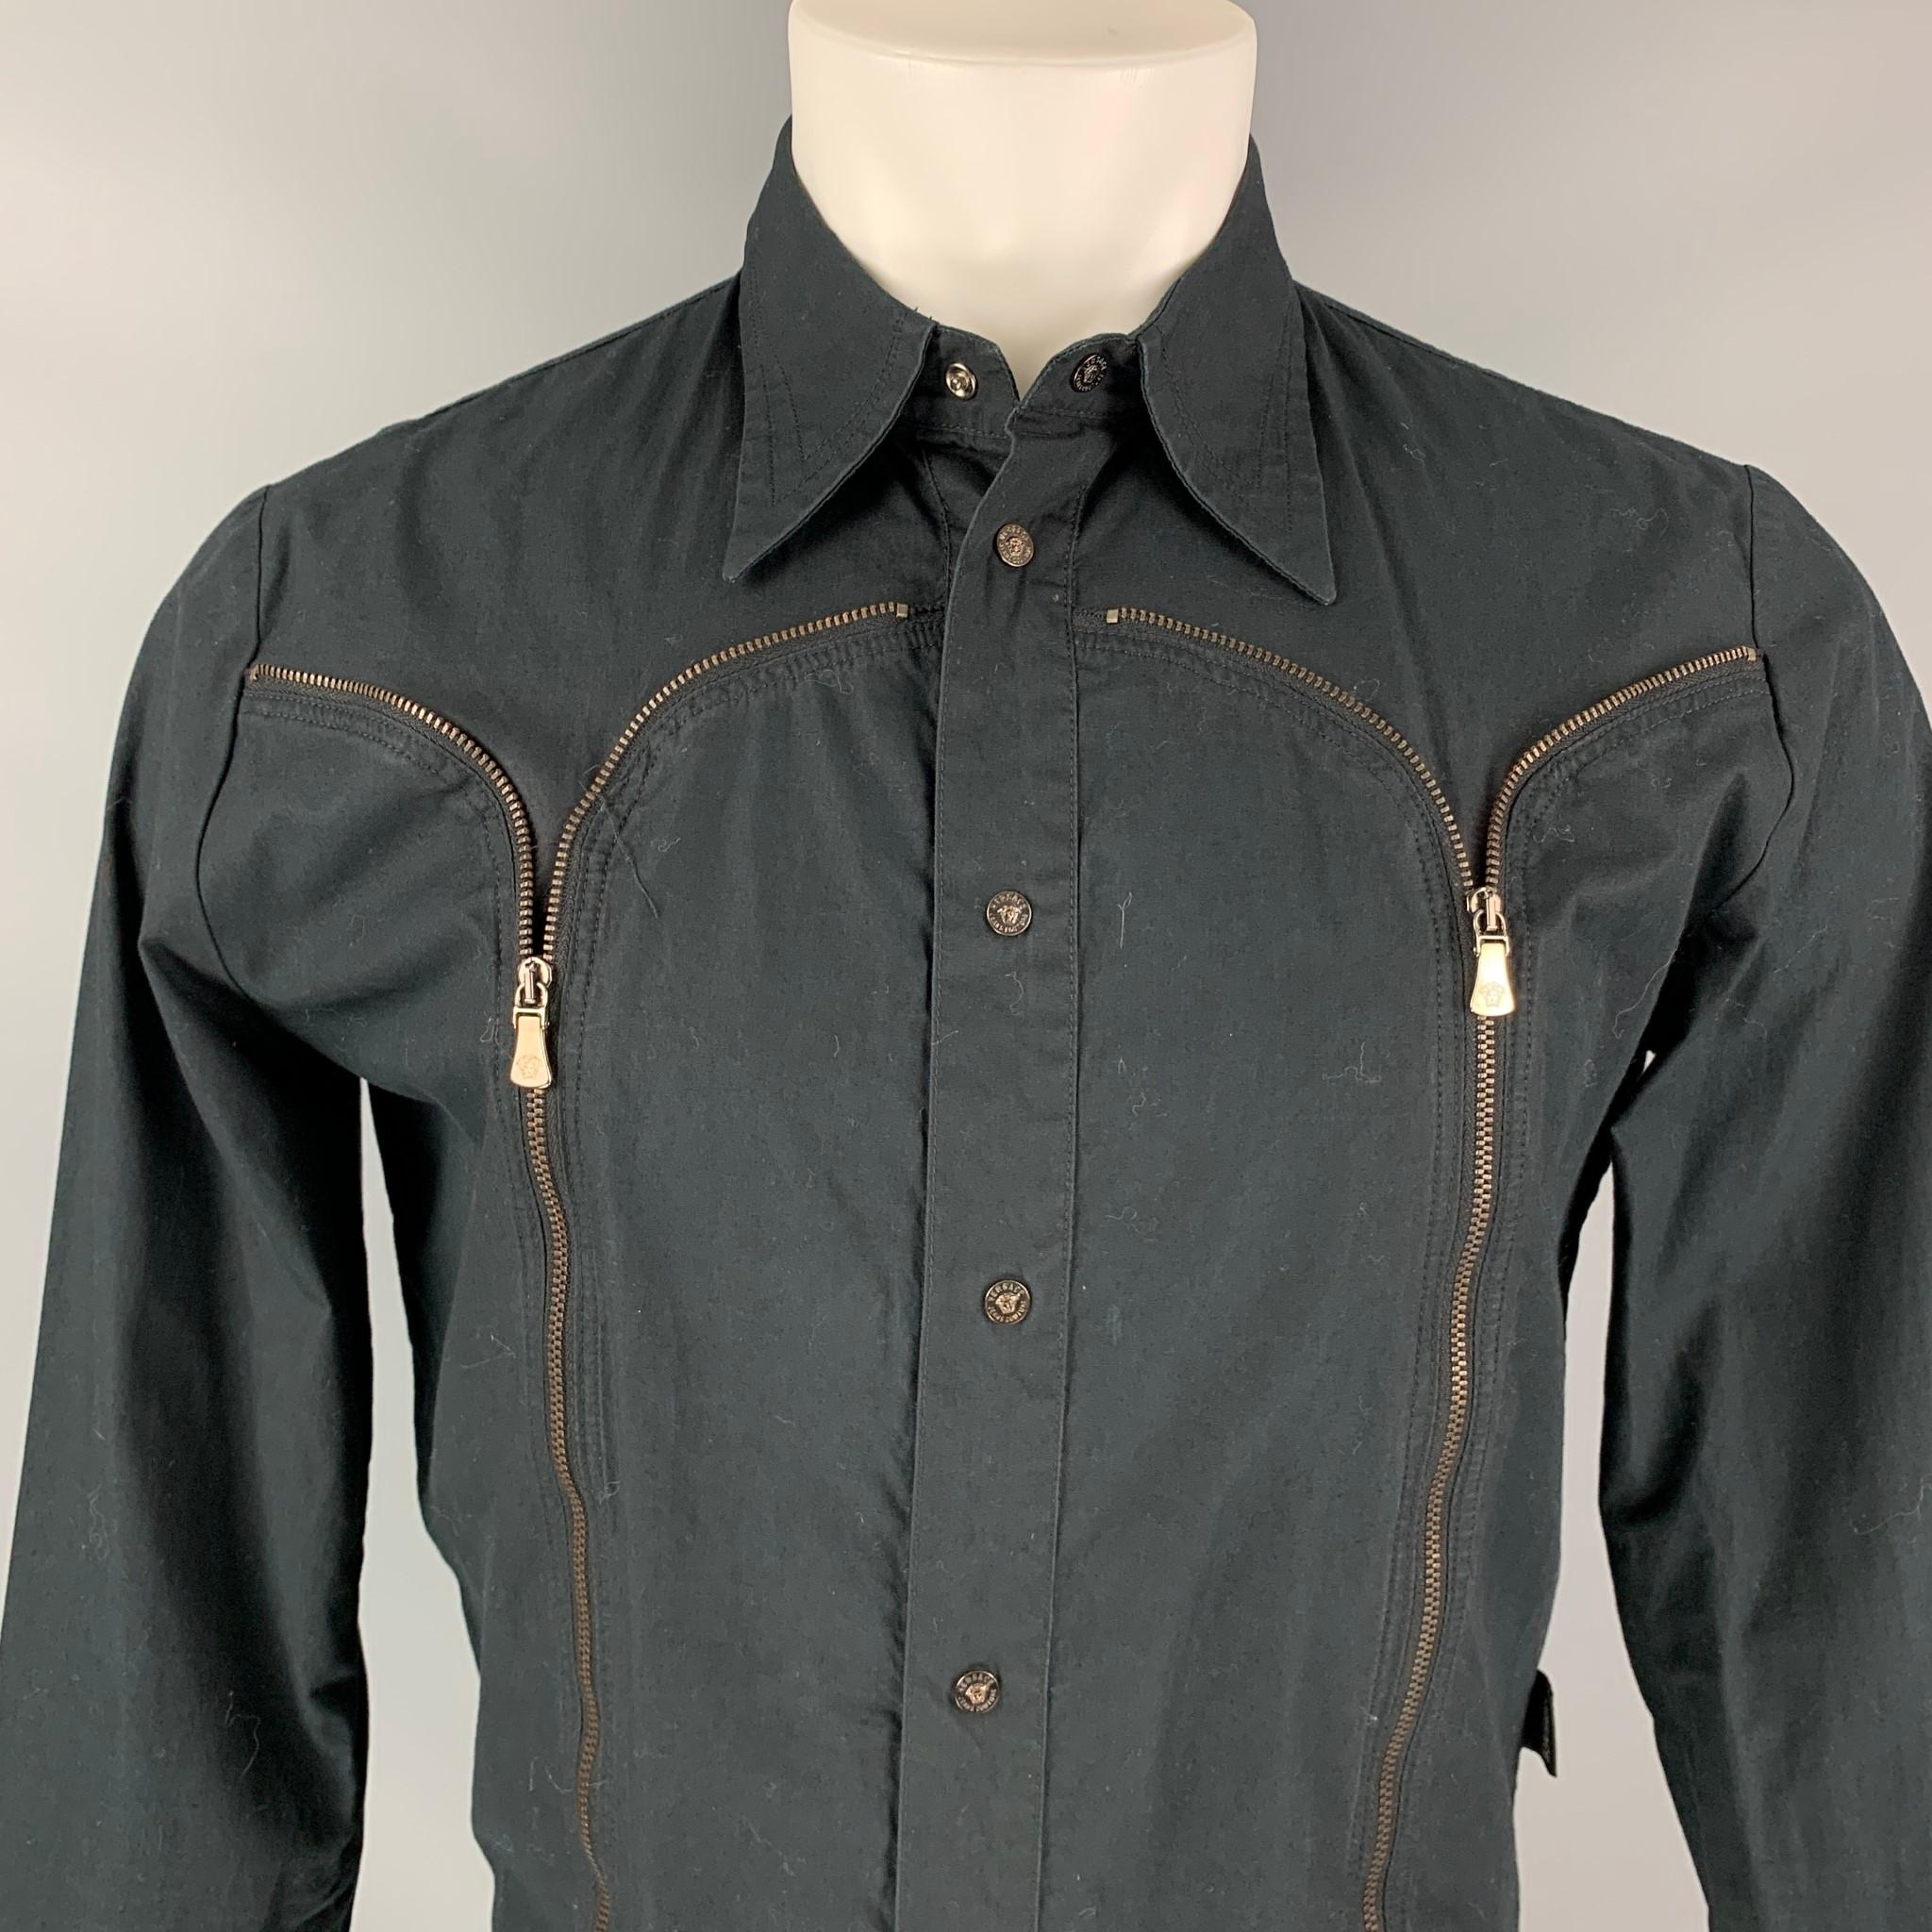 VERSACE JEANS COUTURE long sleeve shirt comes in a black cotton featuring a front zipper design, pointed collar, and a snap button closure. Made in Italy. 

Very Good Pre-Owned Condition.
Marked: L

Measurements:

Shoulder: 18 in.
Chest: 42